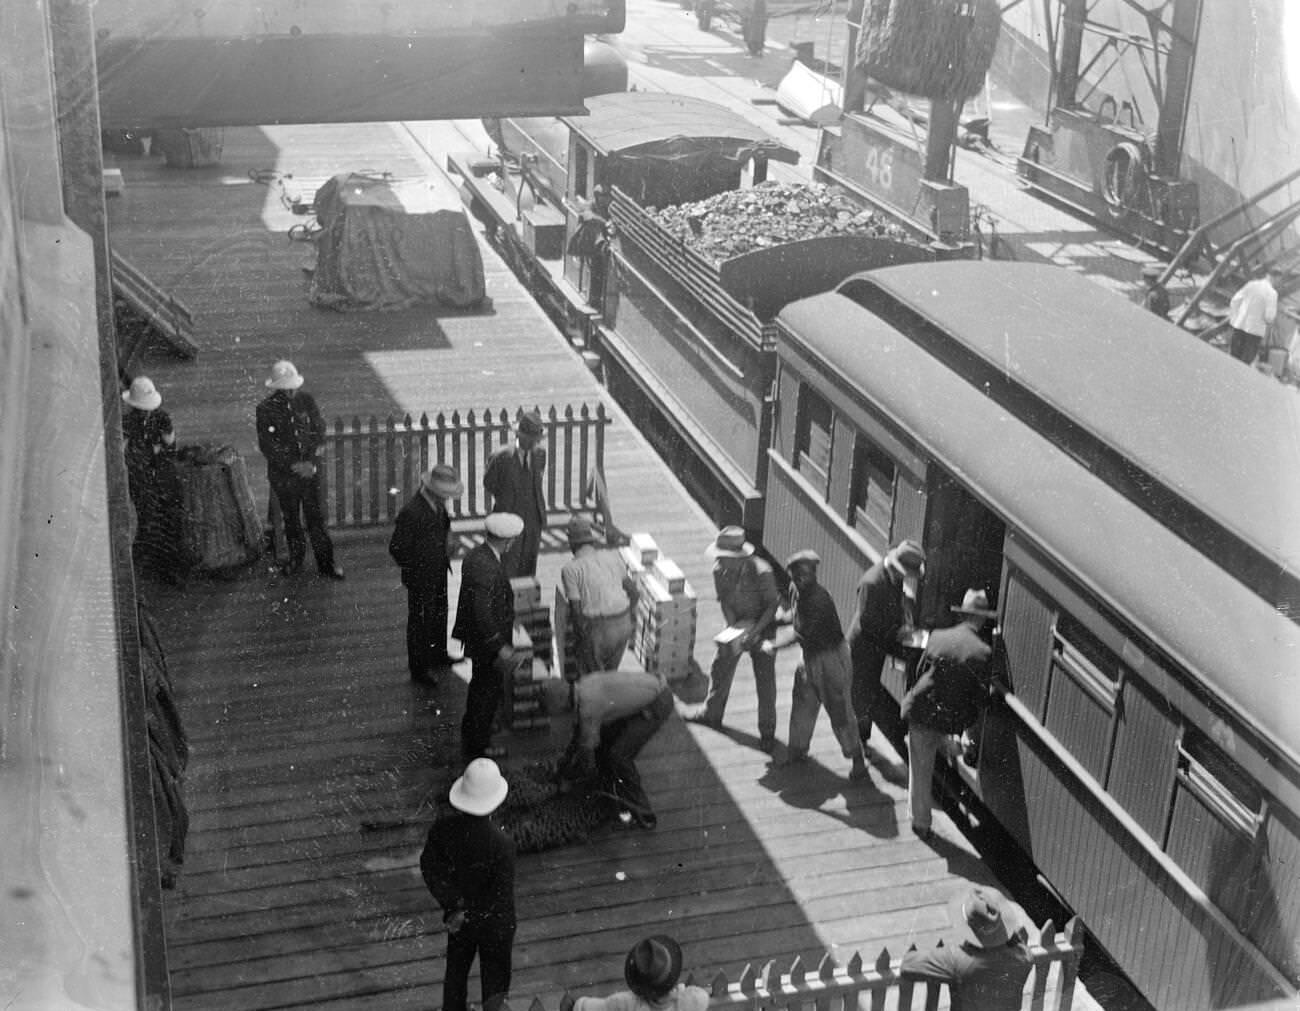 Loading gold at Cape Town , 1930s